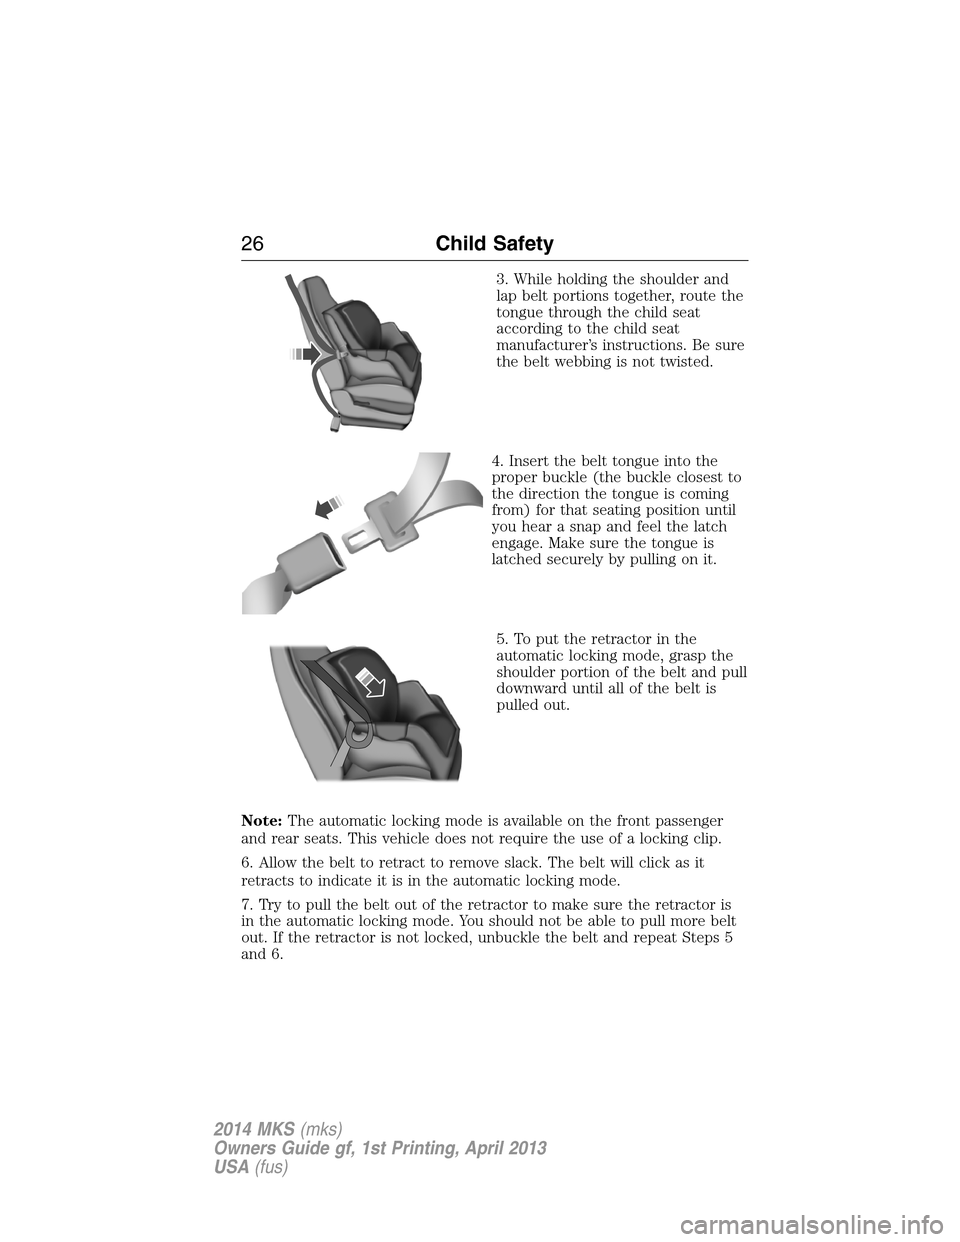 LINCOLN MKS 2014 Owners Manual 3. While holding the shoulder and
lap belt portions together, route the
tongue through the child seat
according to the child seat
manufacturer’s instructions. Be sure
the belt webbing is not twisted